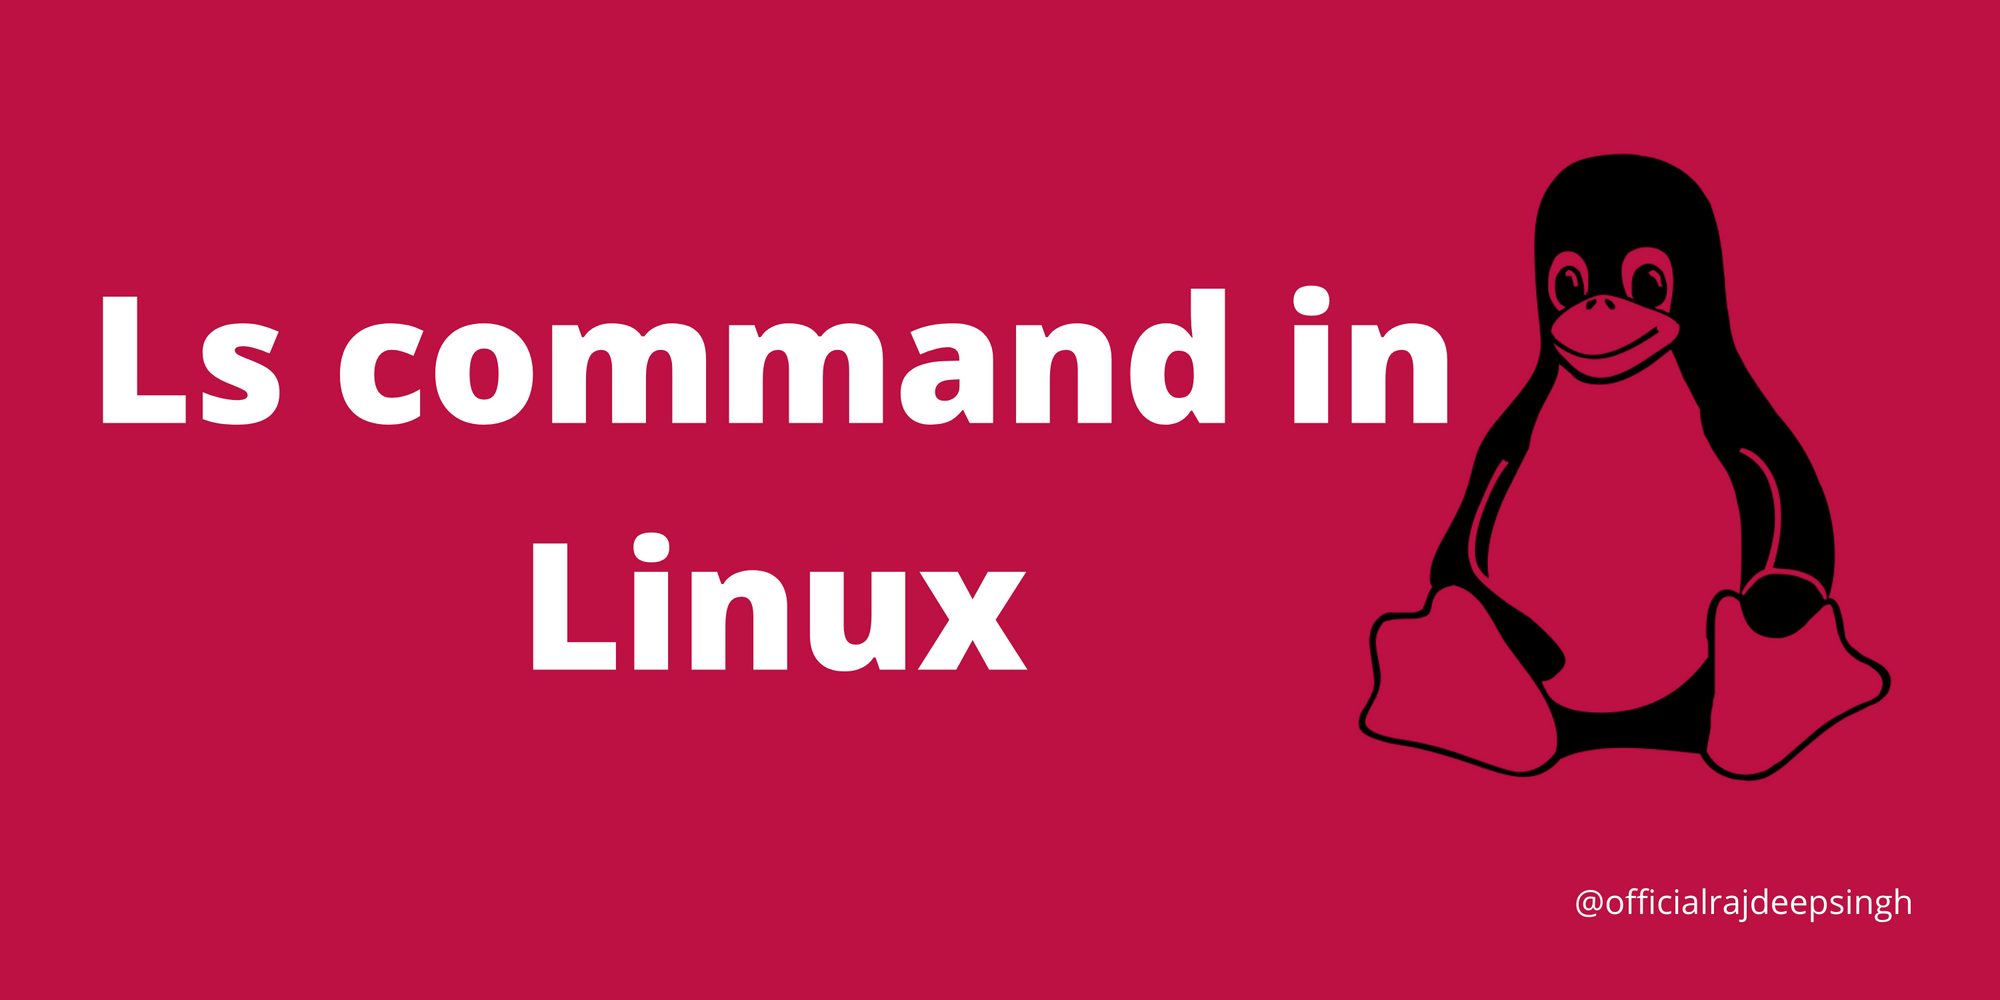 Ls command in Linux